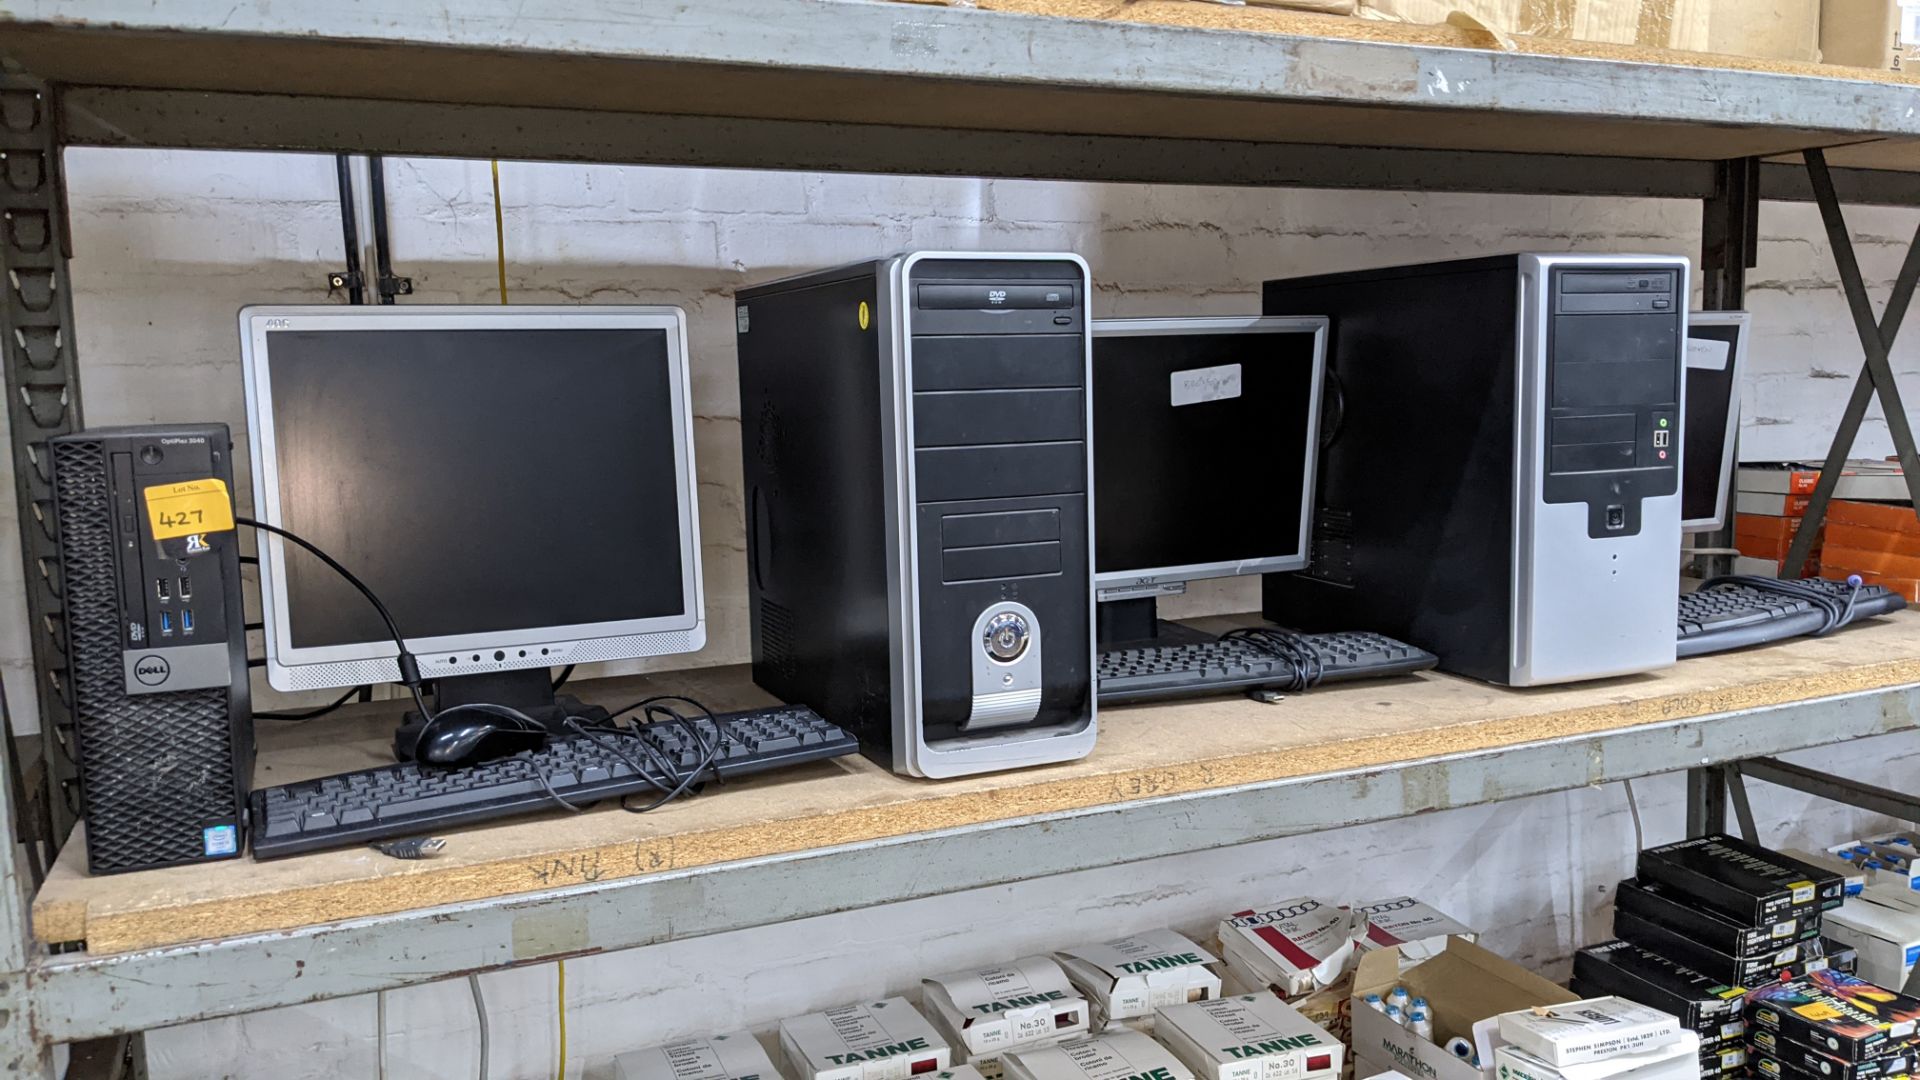 3 off assorted desktop computers each with monitor, keyboard & mouse